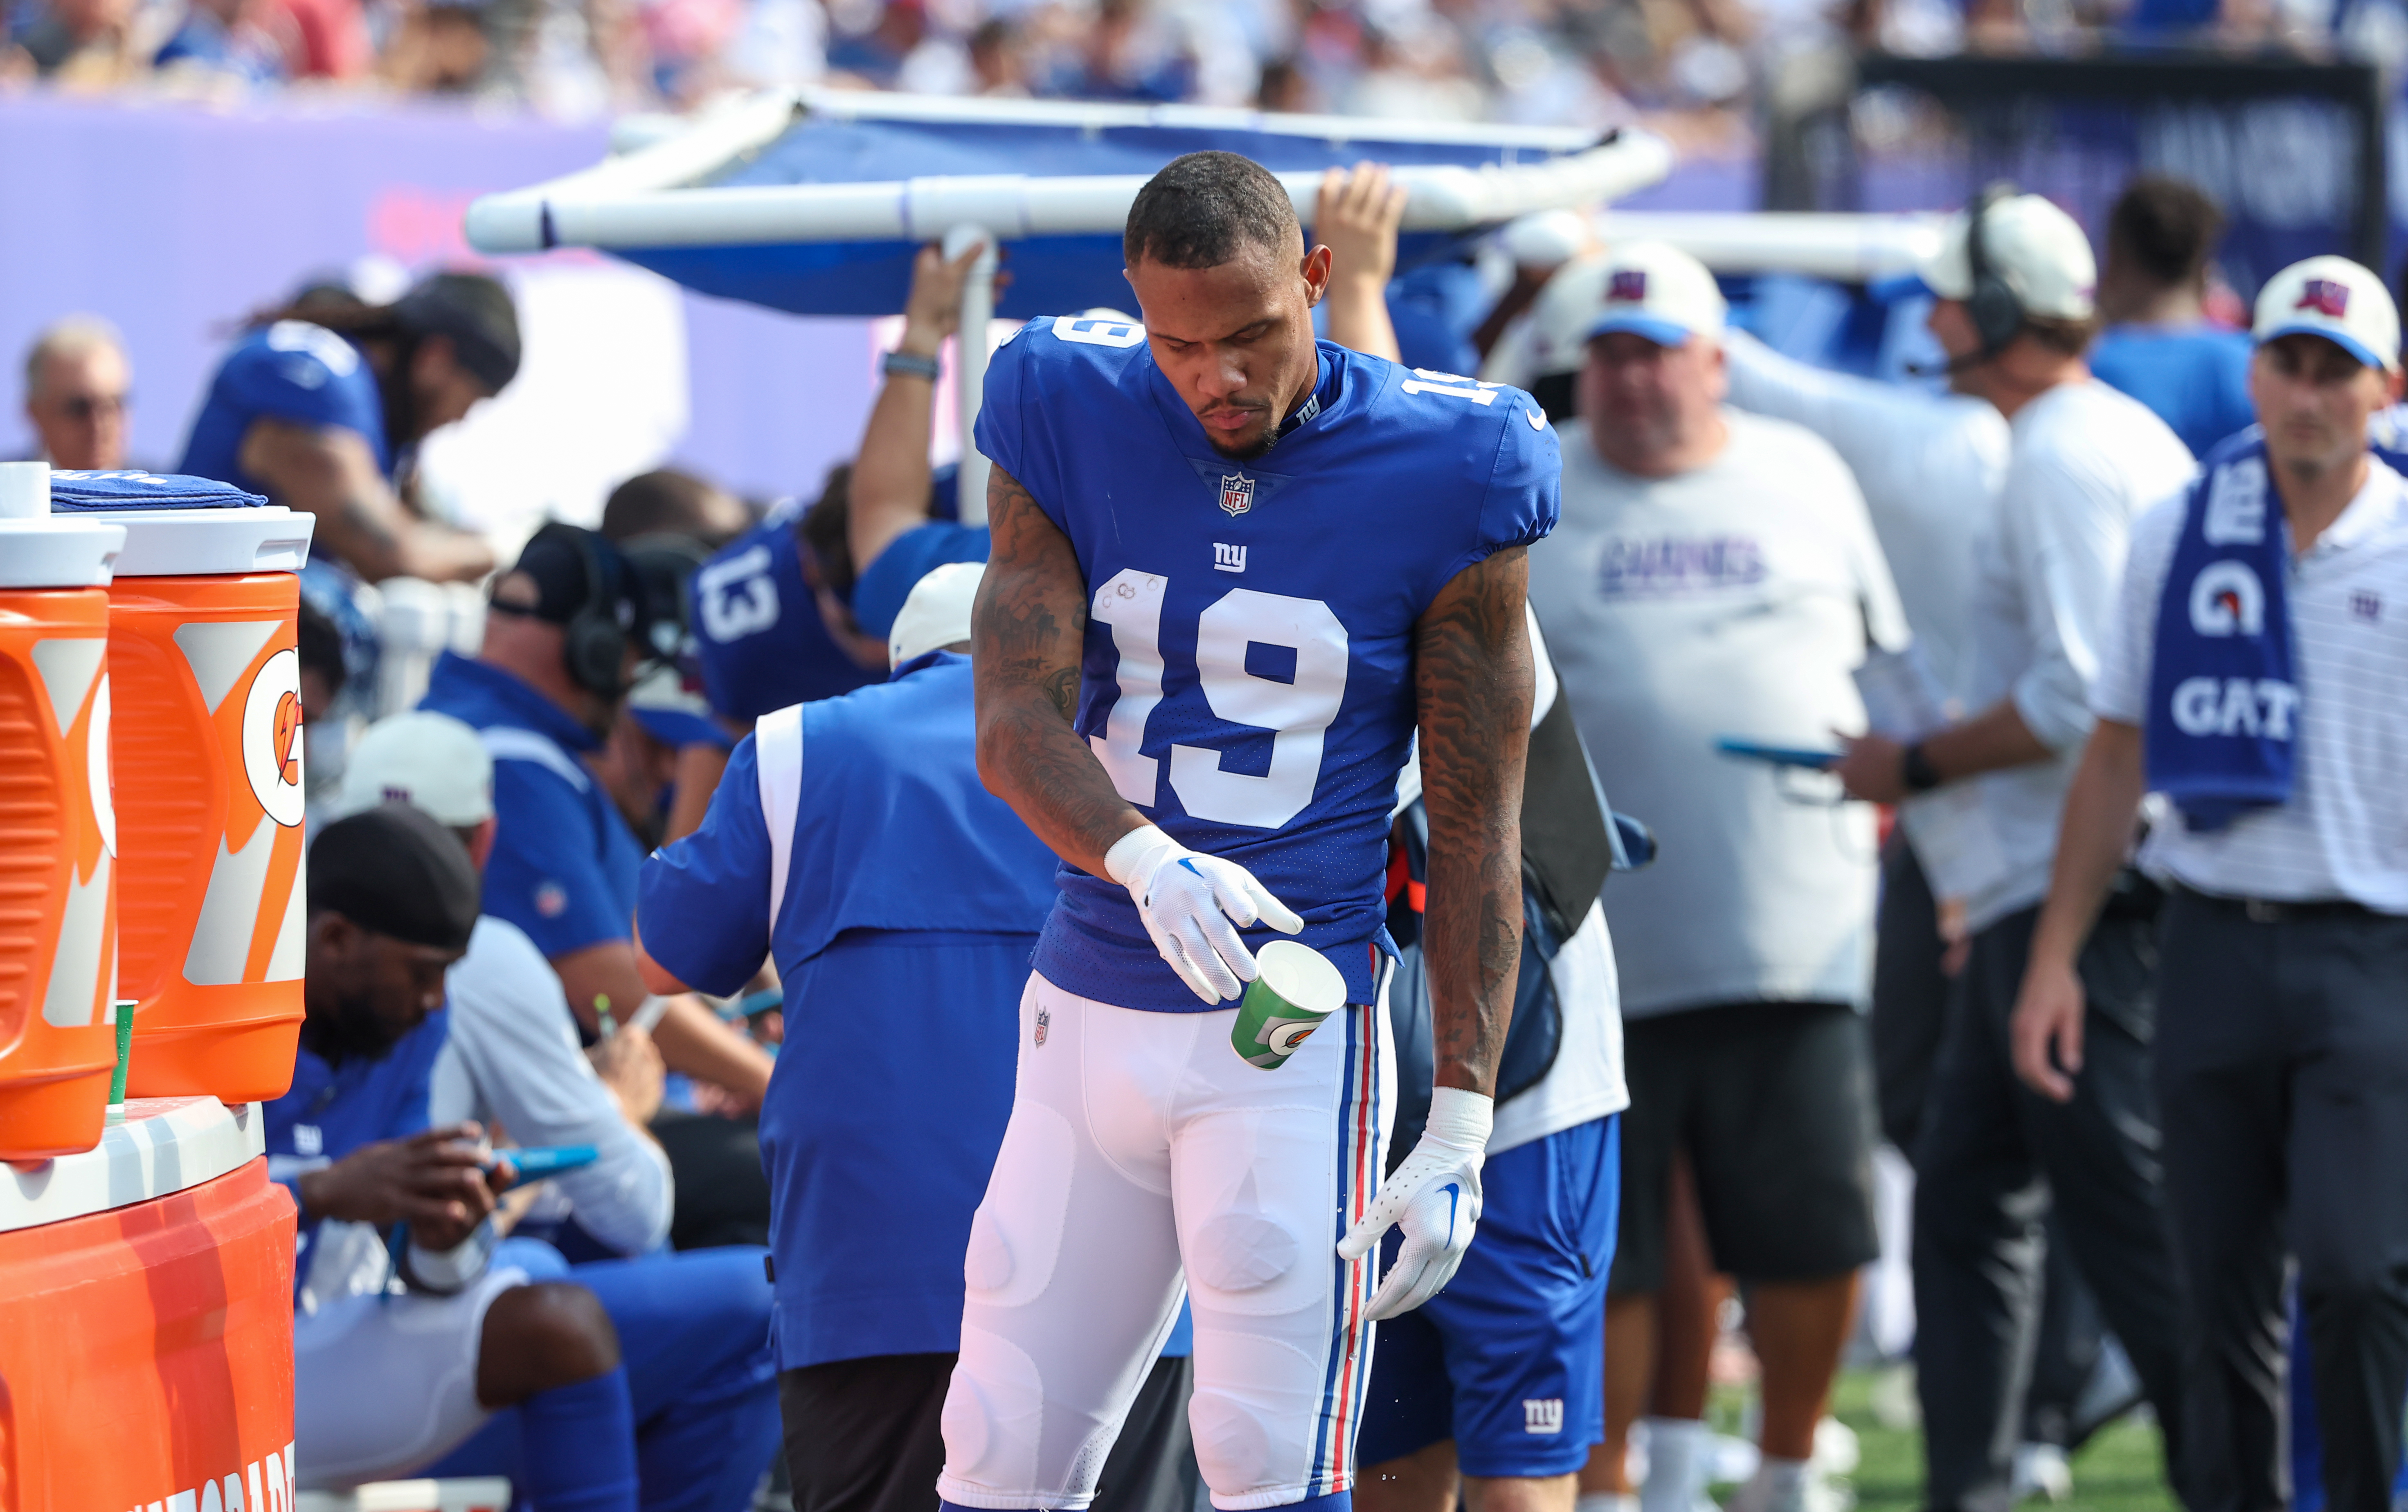 Wink Martindale brings heat for NY Giants, but should he tone it down? -  Big Blue View